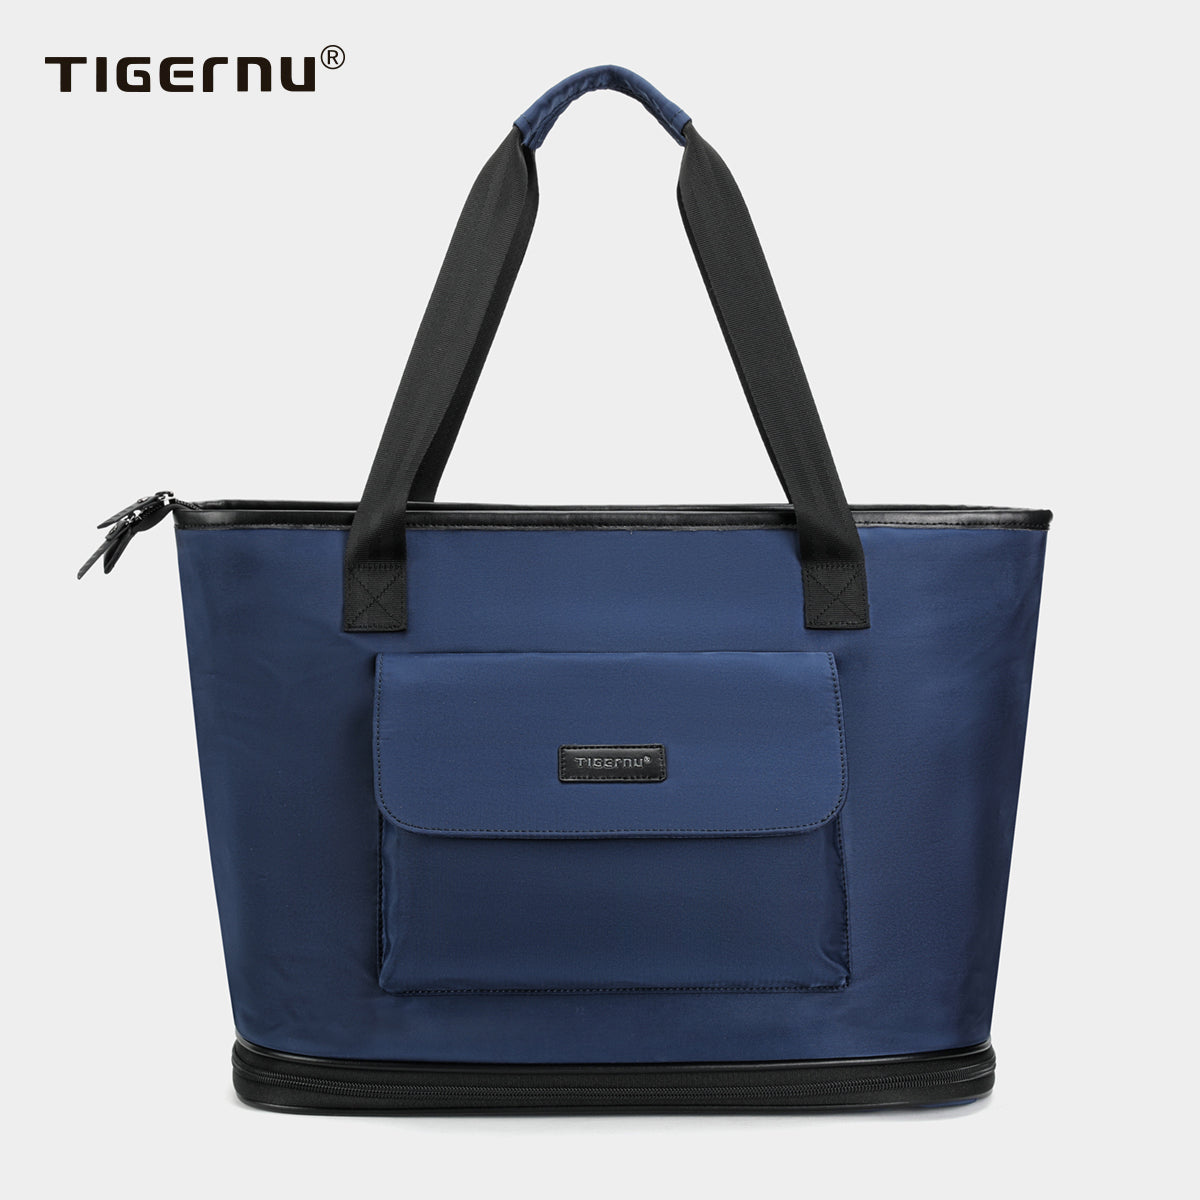 Tigernu T-S8395 15.6 Inch large capacity water resistant anti-theft luggage bag women travel bags with laptop compartment